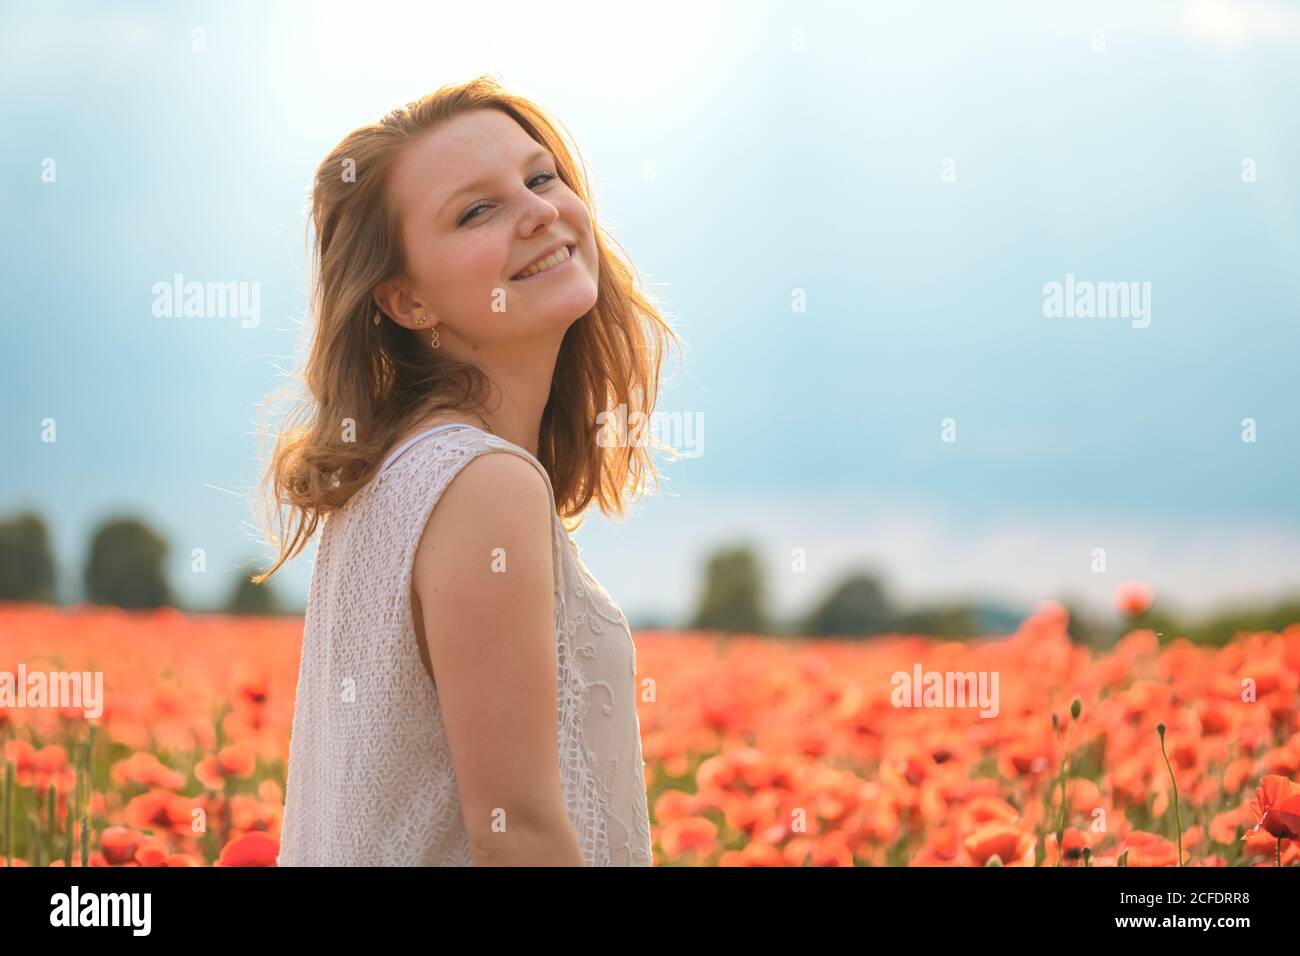 Young beaming girl in the poppy field, smiling, looking at camera Stock Photo